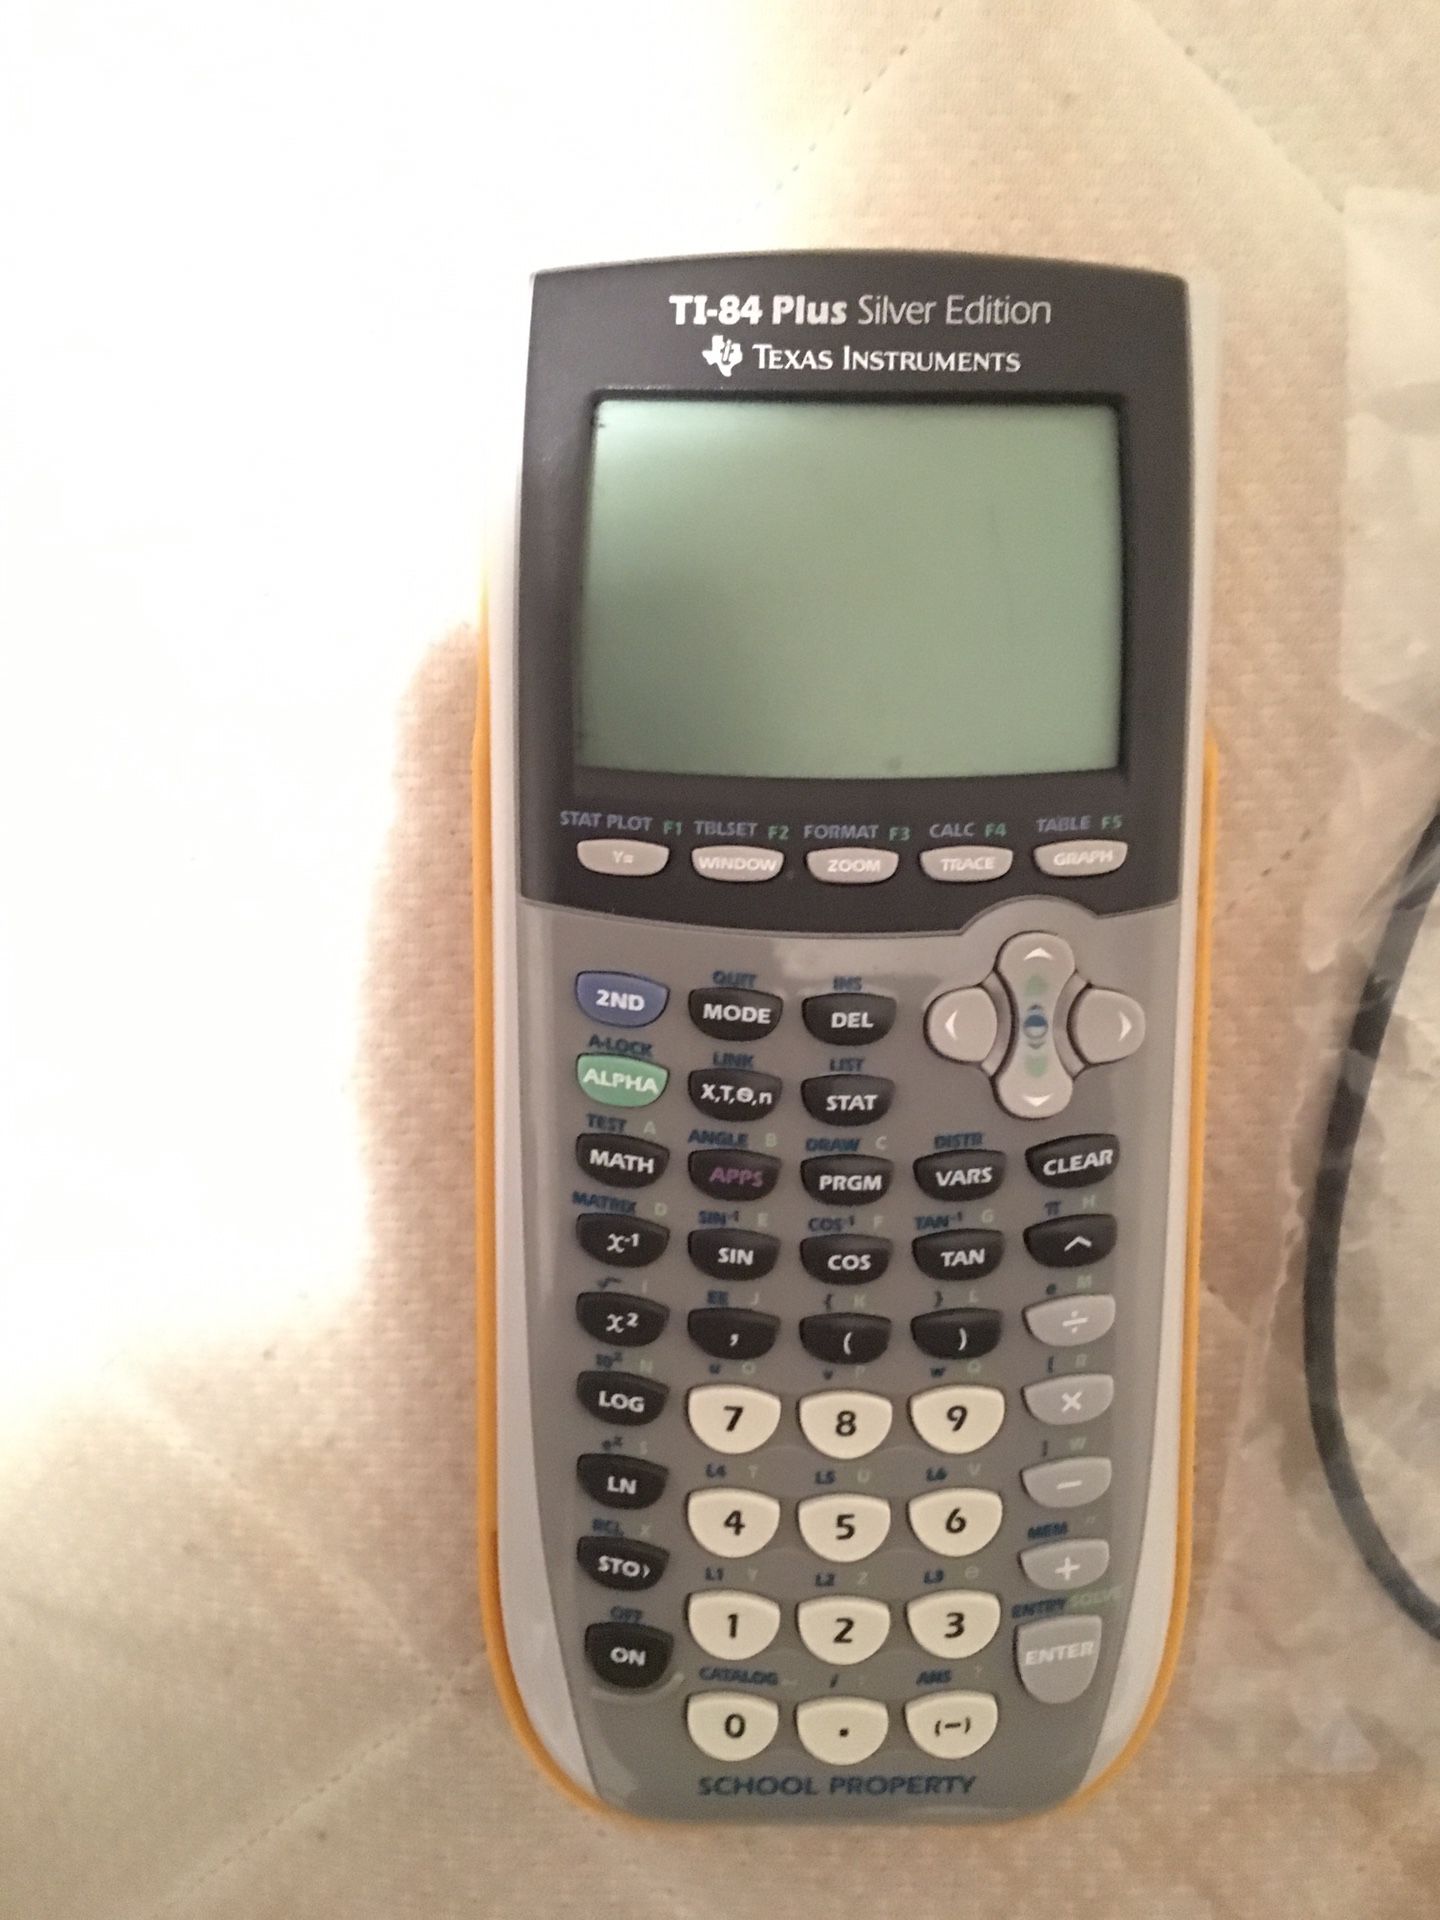 Texas Instruments TI-84 Plus Silver Edition Graphing Calculator - Yellow